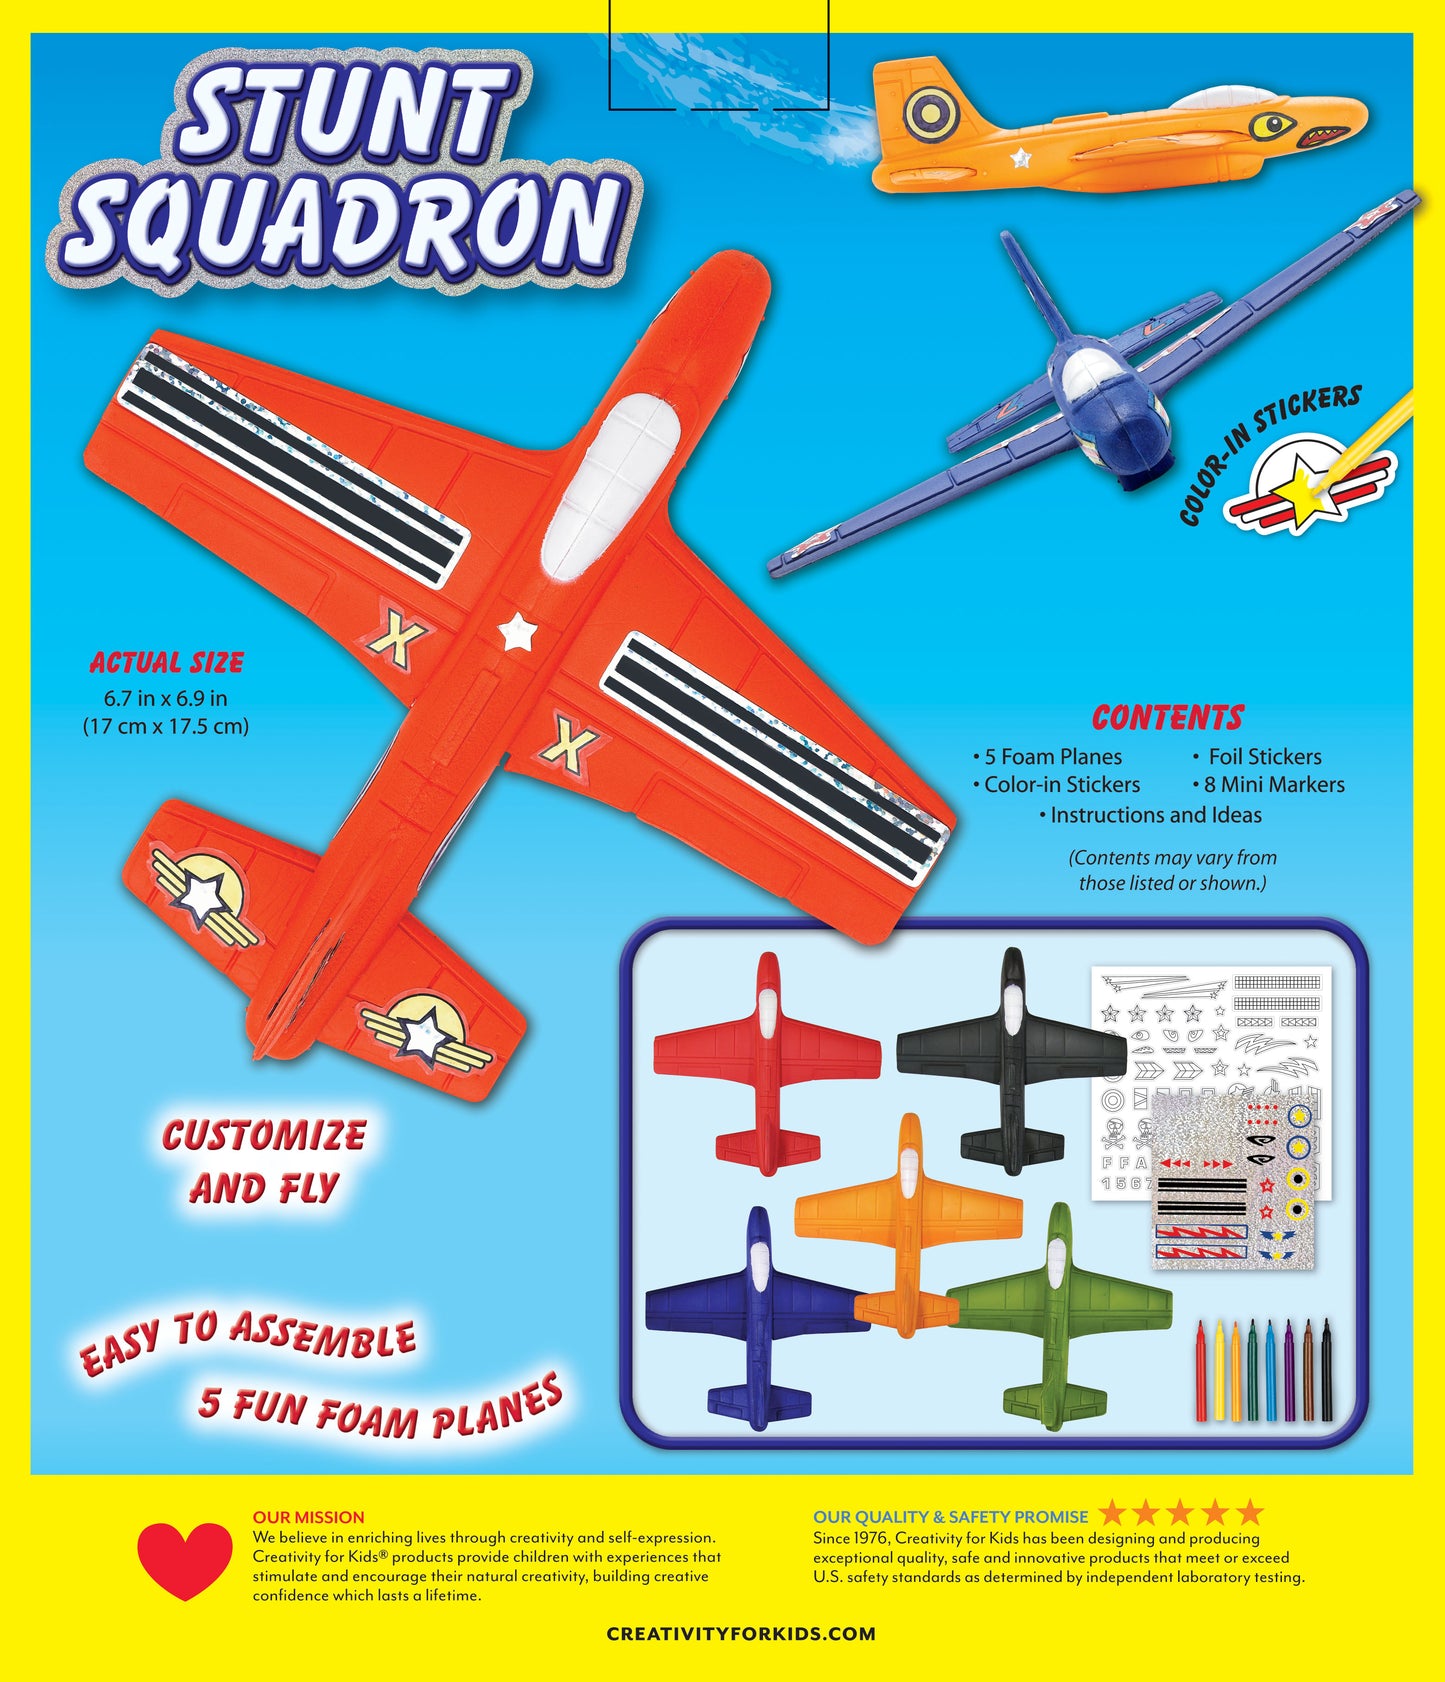 Customize and fly your own toy plane- easy to assemble 5 foam toy planes, fom Faber Castell